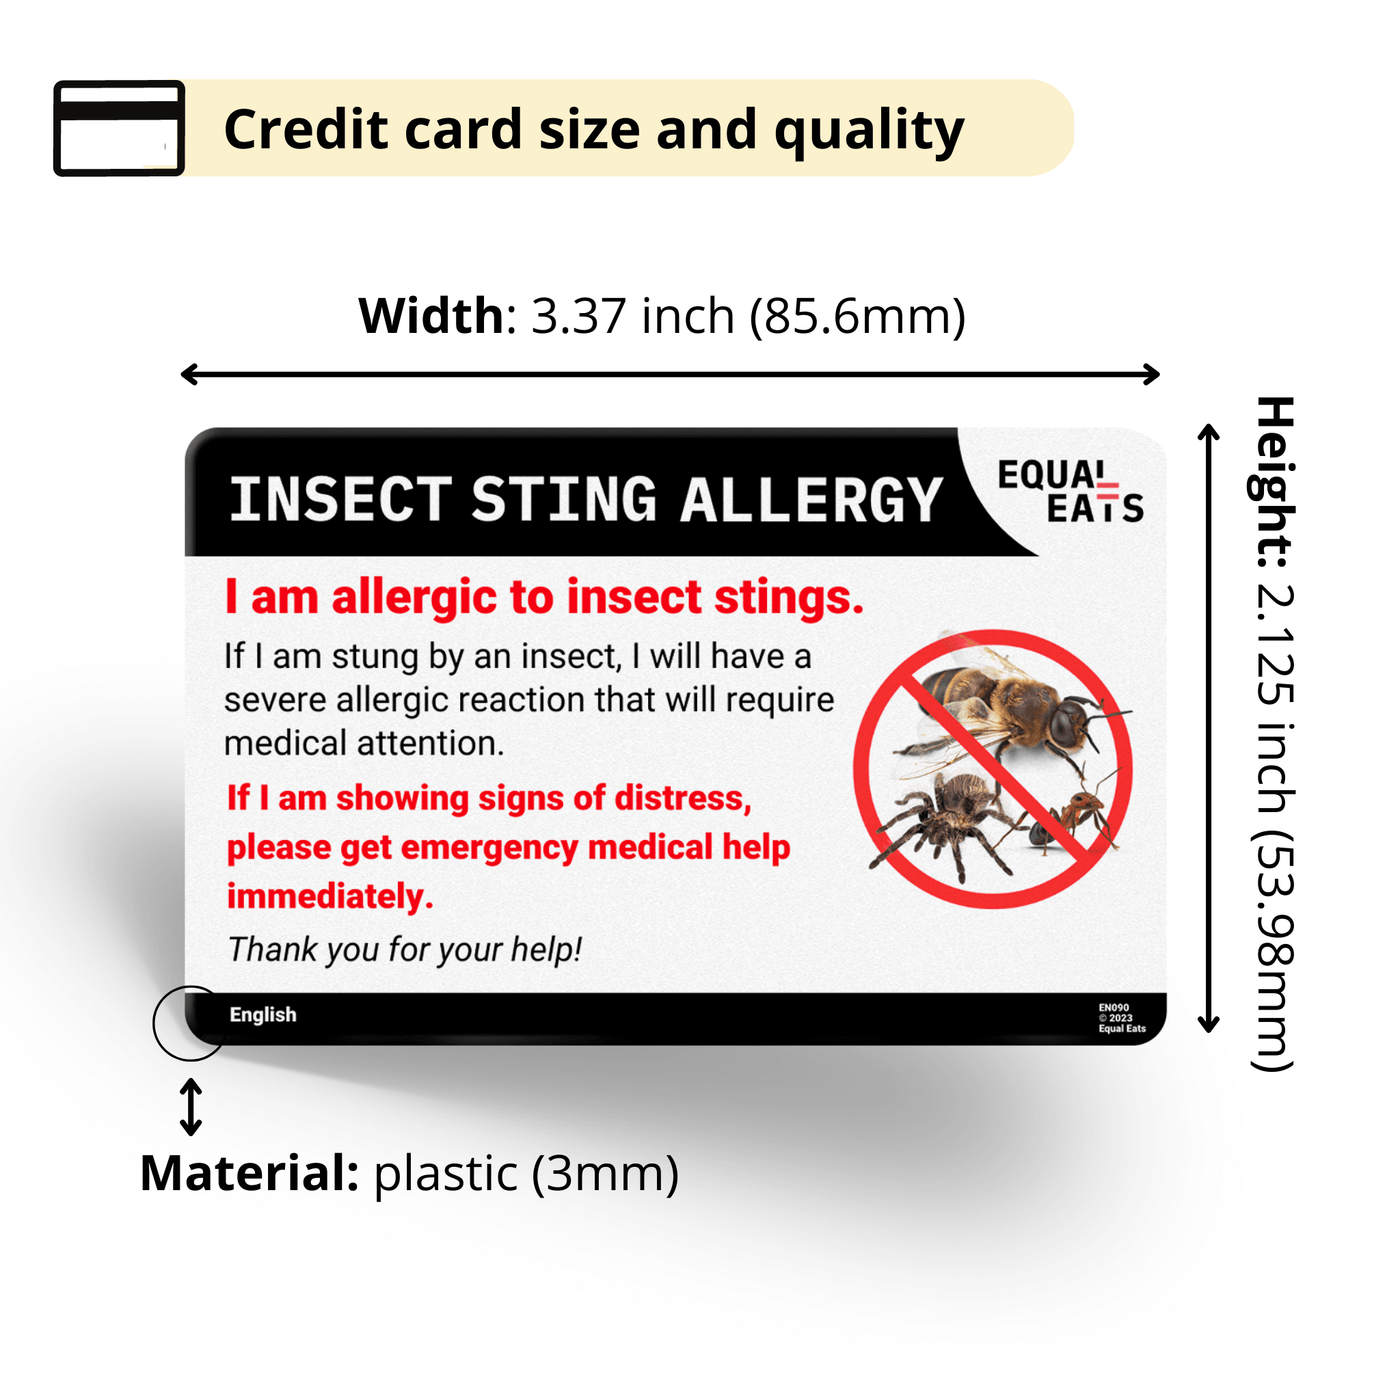 Slovak Insect Sting Allergy Card